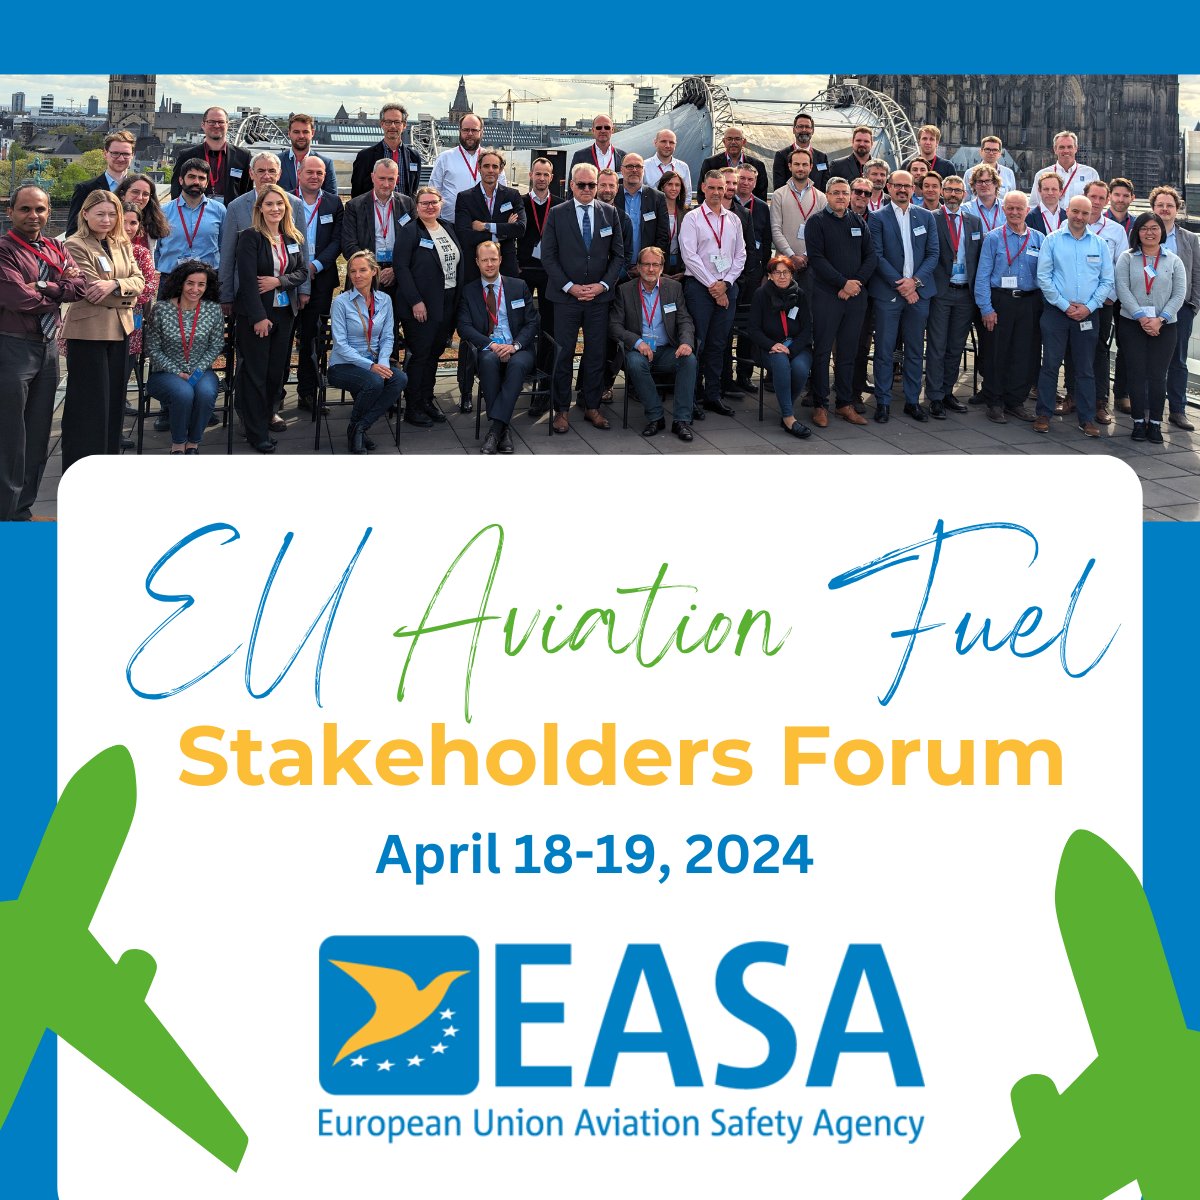 #EASA wants to strengthen cooperation between European #fuel stakeholders, with the aspiration of optimising the jet fuel composition to respond to #environmental challenges. Read more in our Press Release 👉 easa.europa.eu/en/newsroom-an…